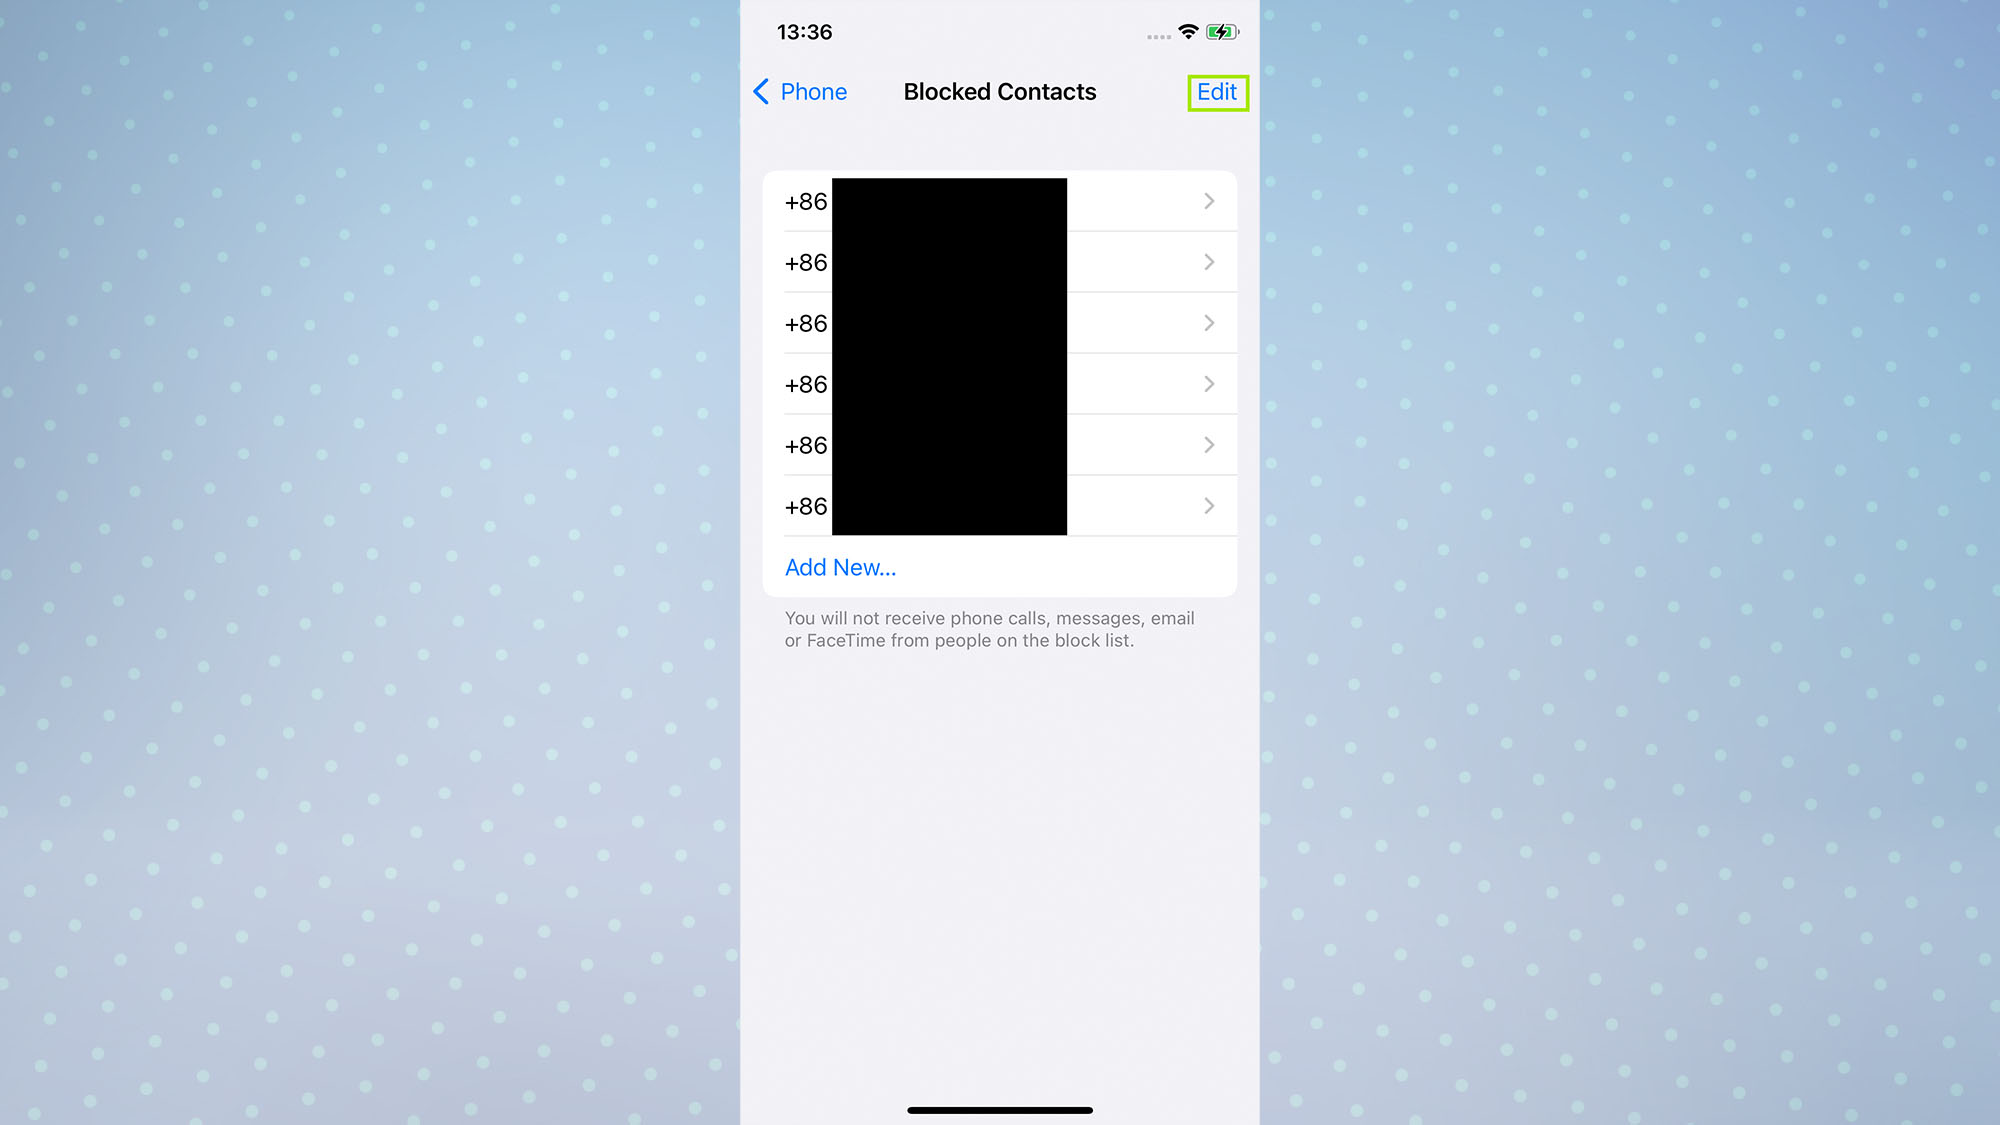 A screenshot of an iPhone screen showing blocked contacts